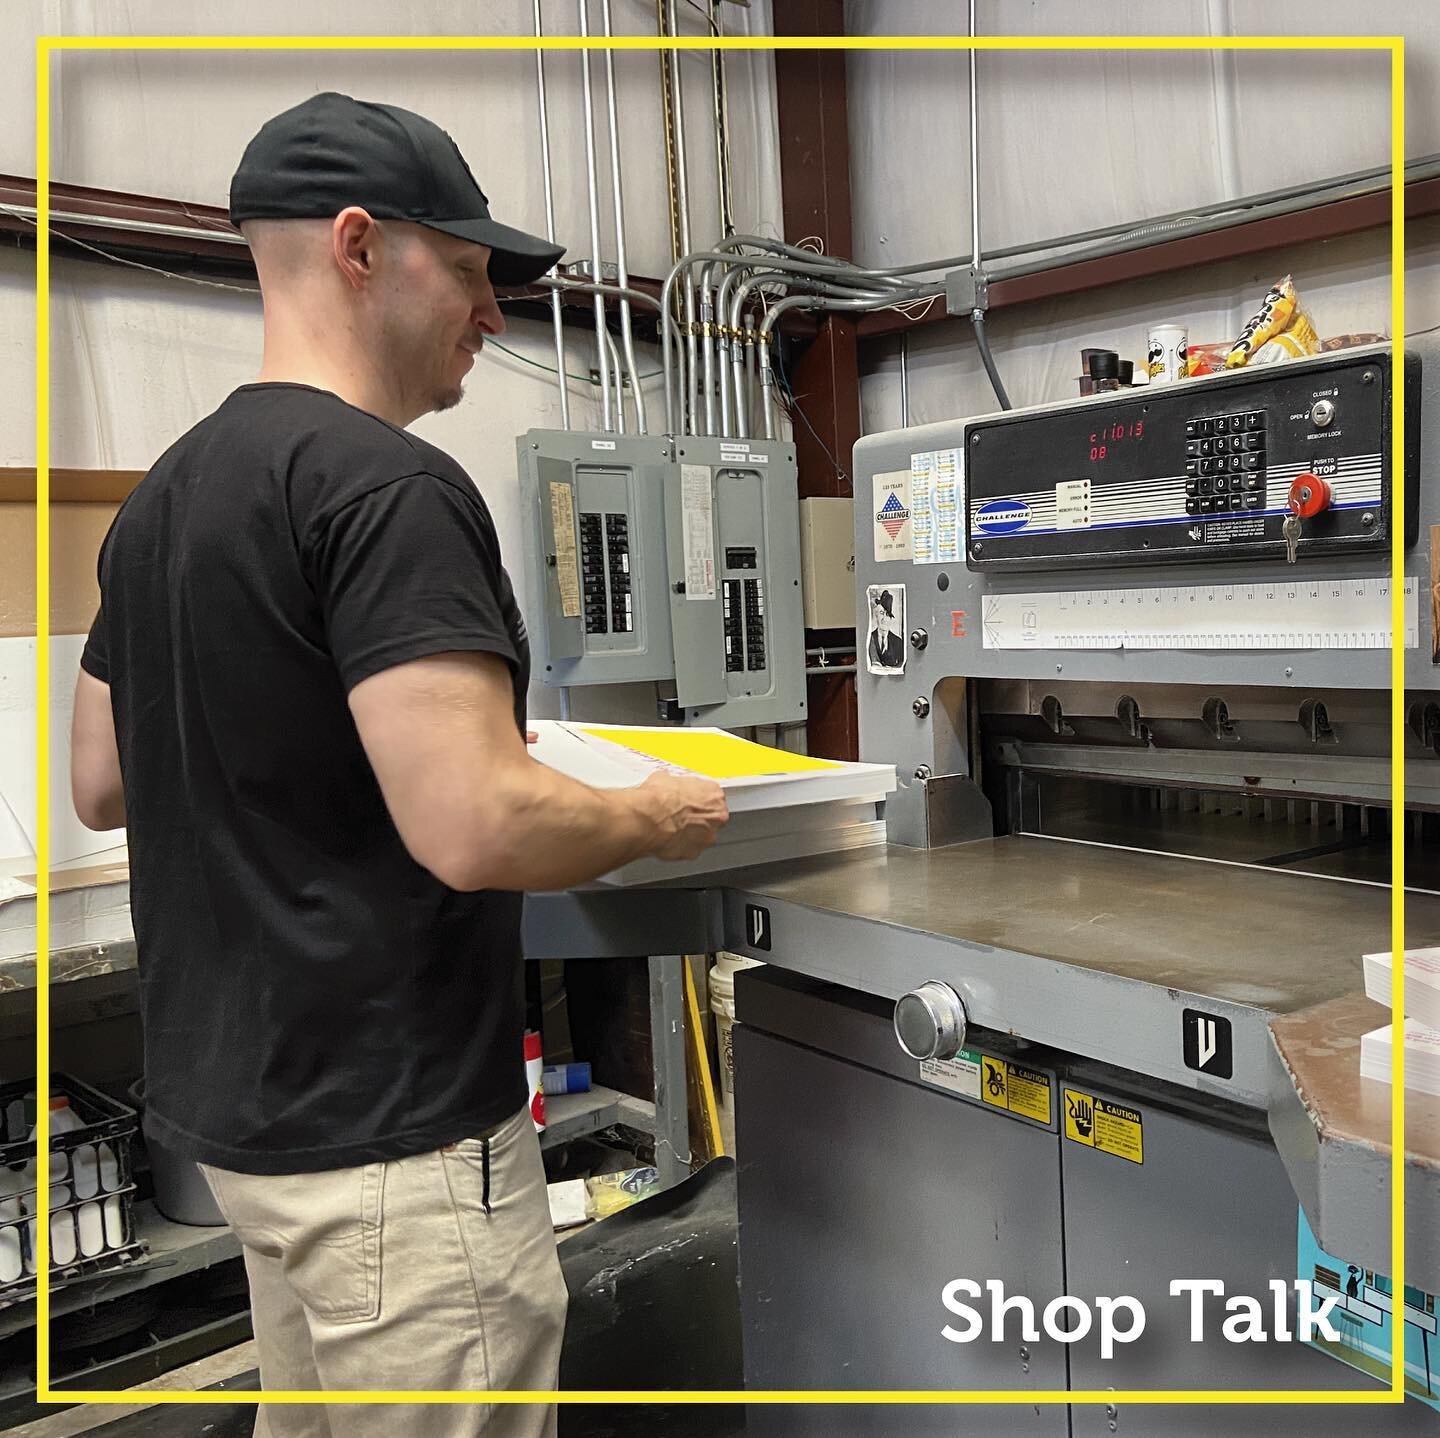 About time for another #wpshoptalk, we talk a lot about the machines and capabilities, but not a lot about the people behind them. This is Eric! He runs most of the bindery machines and has been working with Cy for 21 years. He has figured out and tr